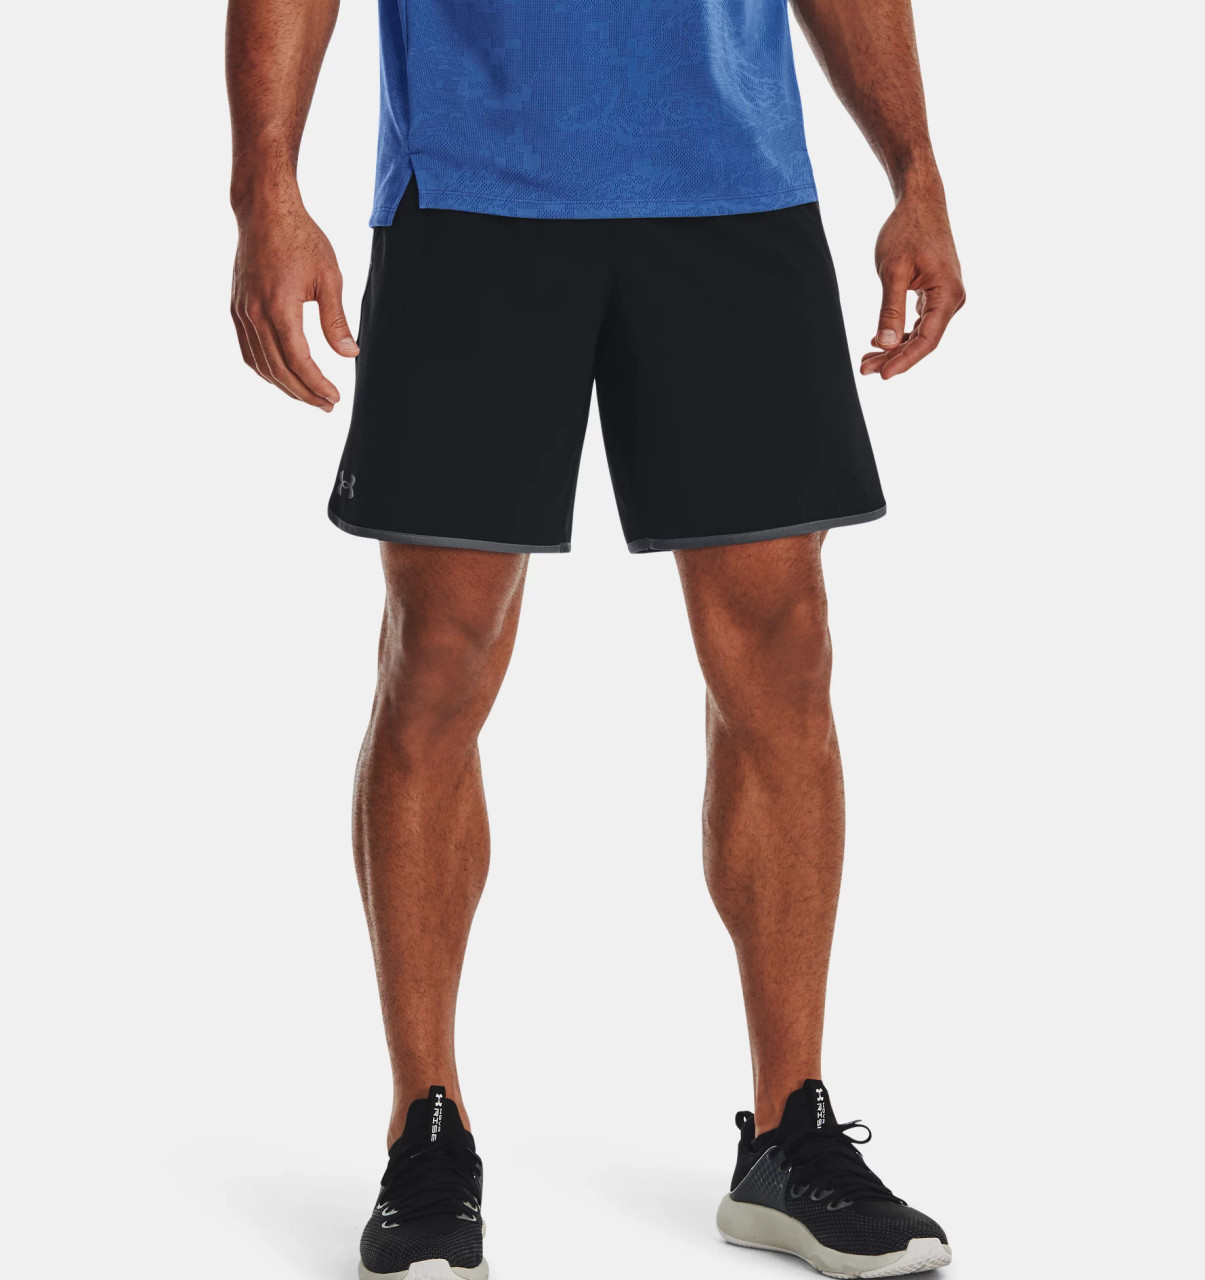 Men's Jogger Shorts You Can Do Anything In